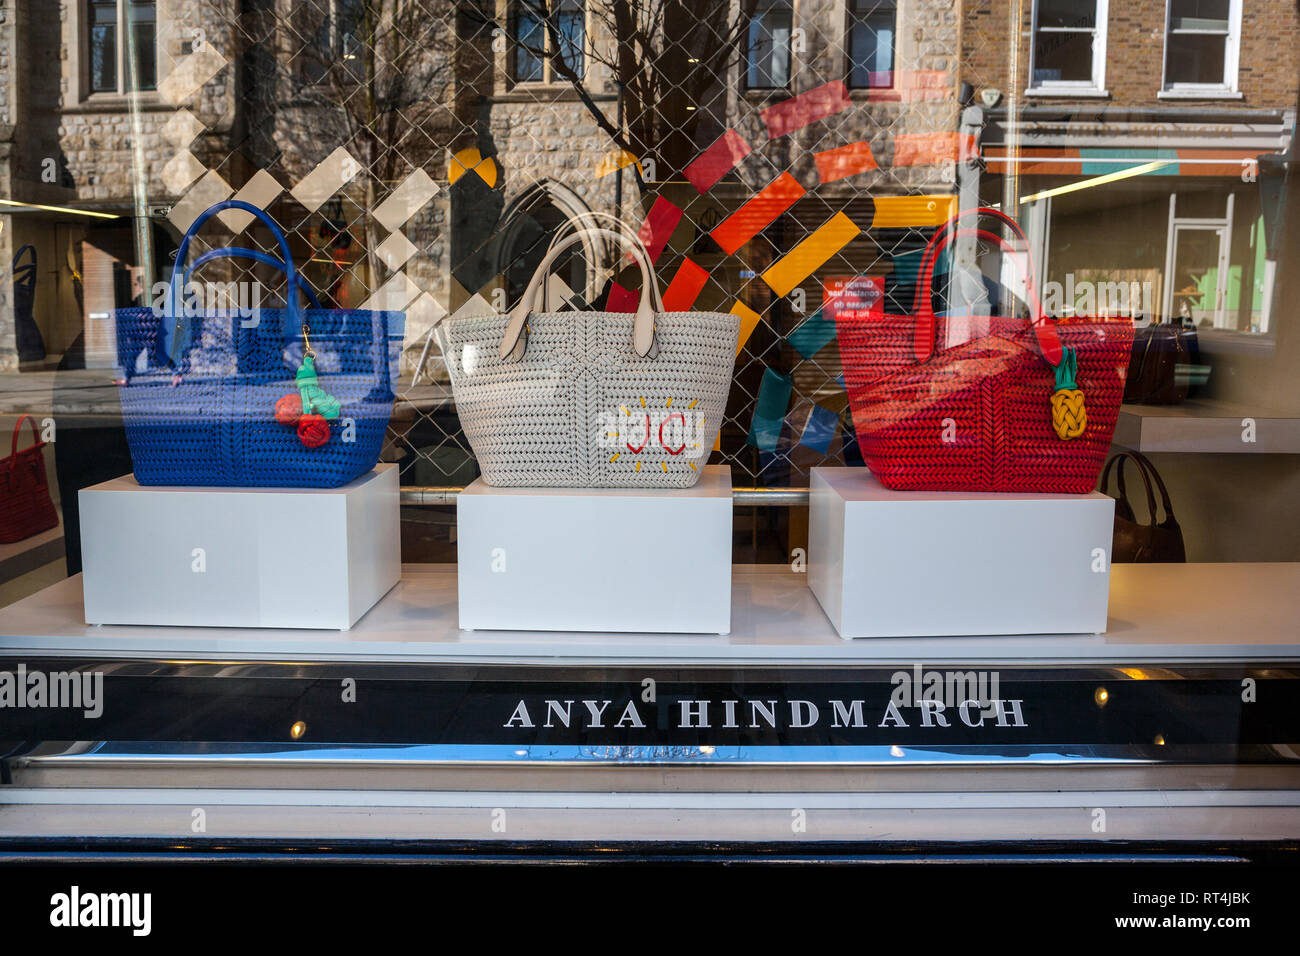 Anya Hindmarch, maroquinerie, magasin Notting Hill Londres Banque D'Images